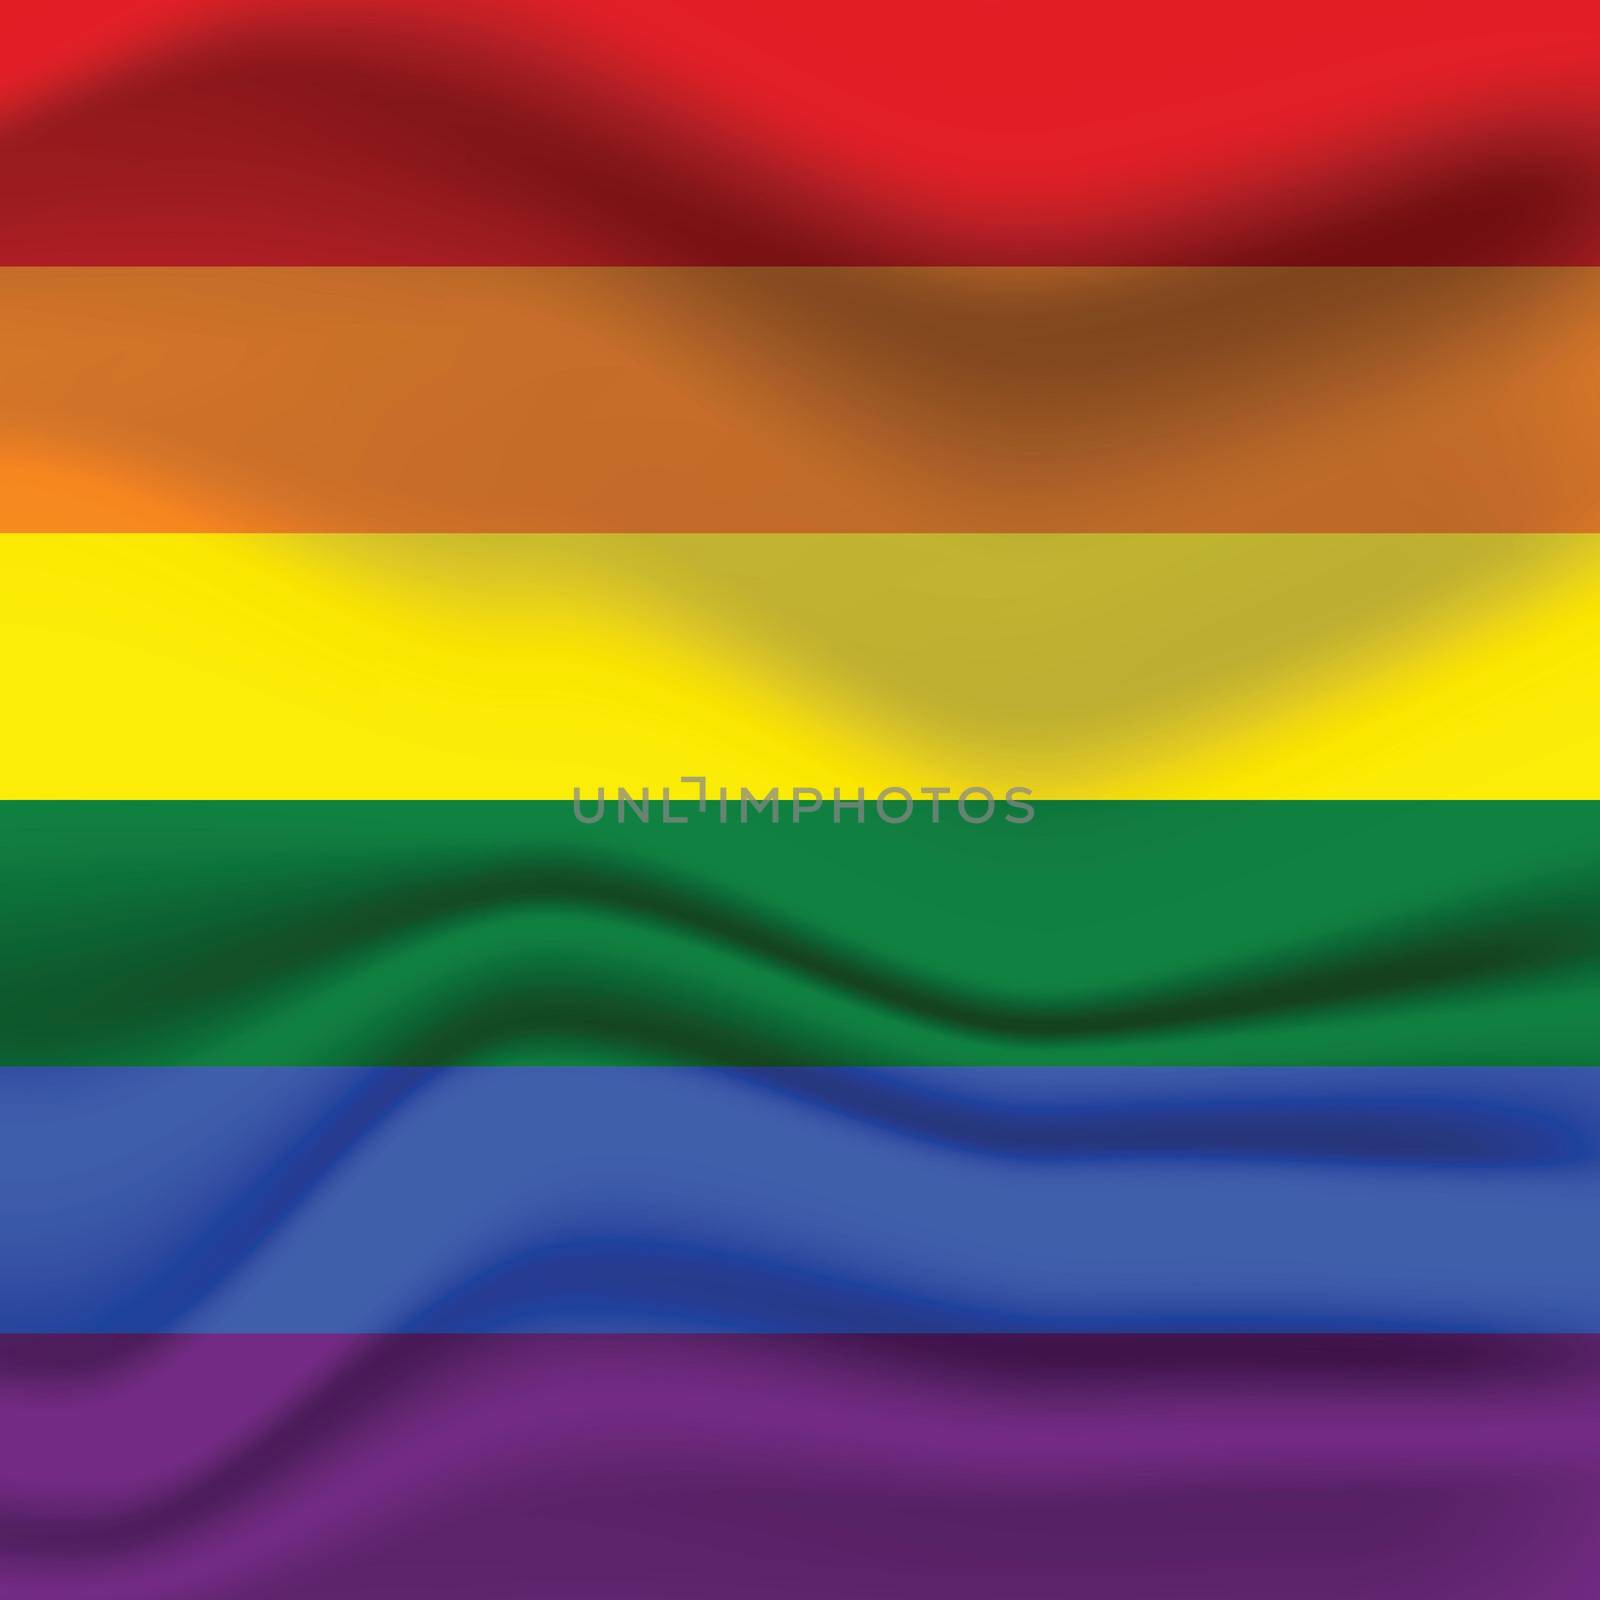 Flag LGBT squared icon, badge or button. Template design, vector illustration. Love wins. LGBT symbol in rainbow colors. Gay pride silk textile background by allaku